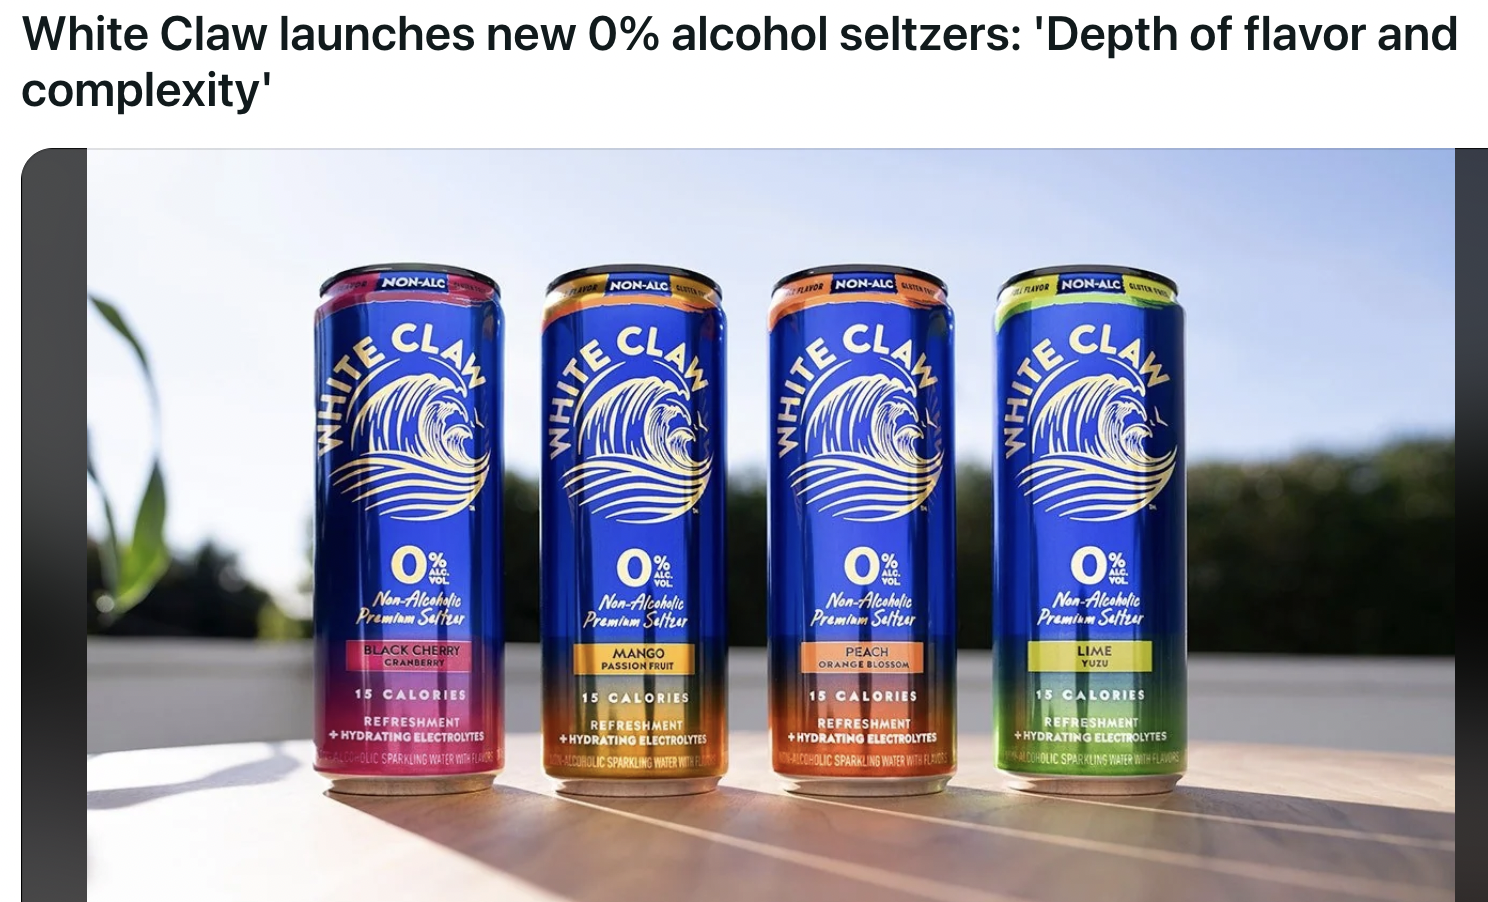 white claw 0 alcohol - White Claw launches new 0% alcohol seltzers 'Depth of flavor and complexity' NowAle 0% Non Alca Premium Sefer Black Chury Samend 18 Calorie Refreshment Hydrating Elect Zeptune Witholla Lihm MonAle Cl 0% NonAl Premium Salten Mango Fa